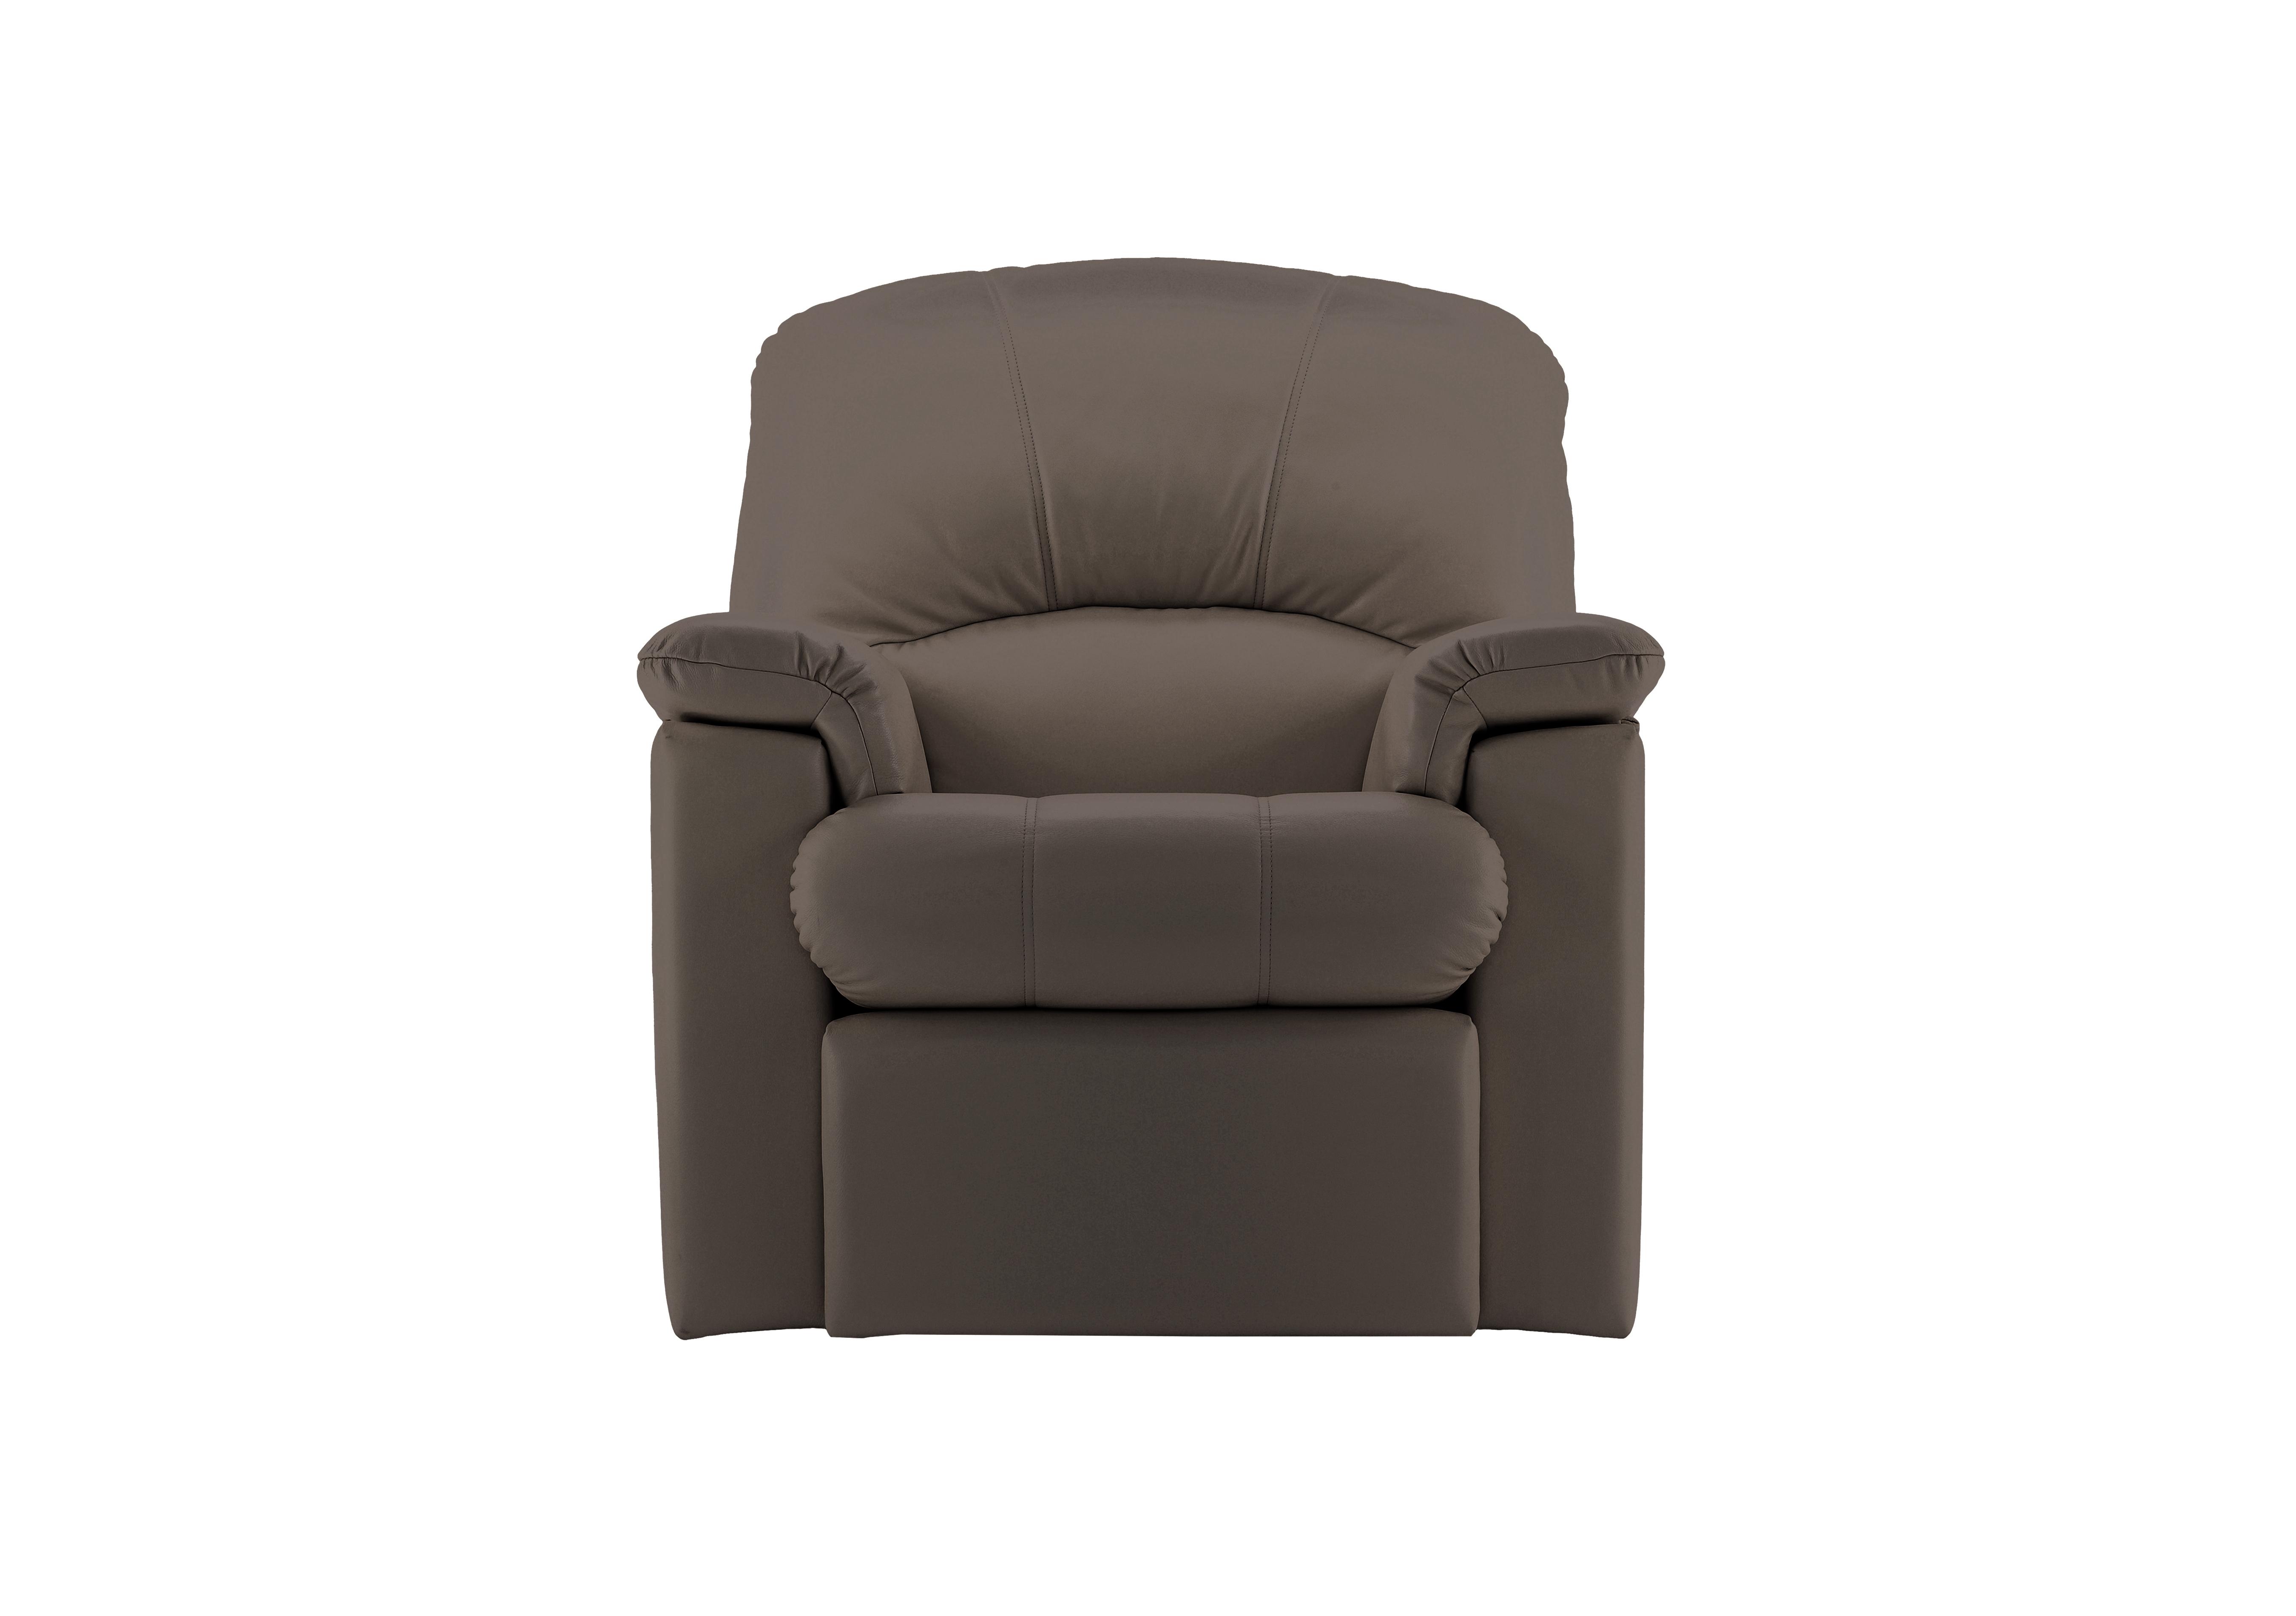 Chloe Small Leather Armchair in P232 Capri Taupe on Furniture Village